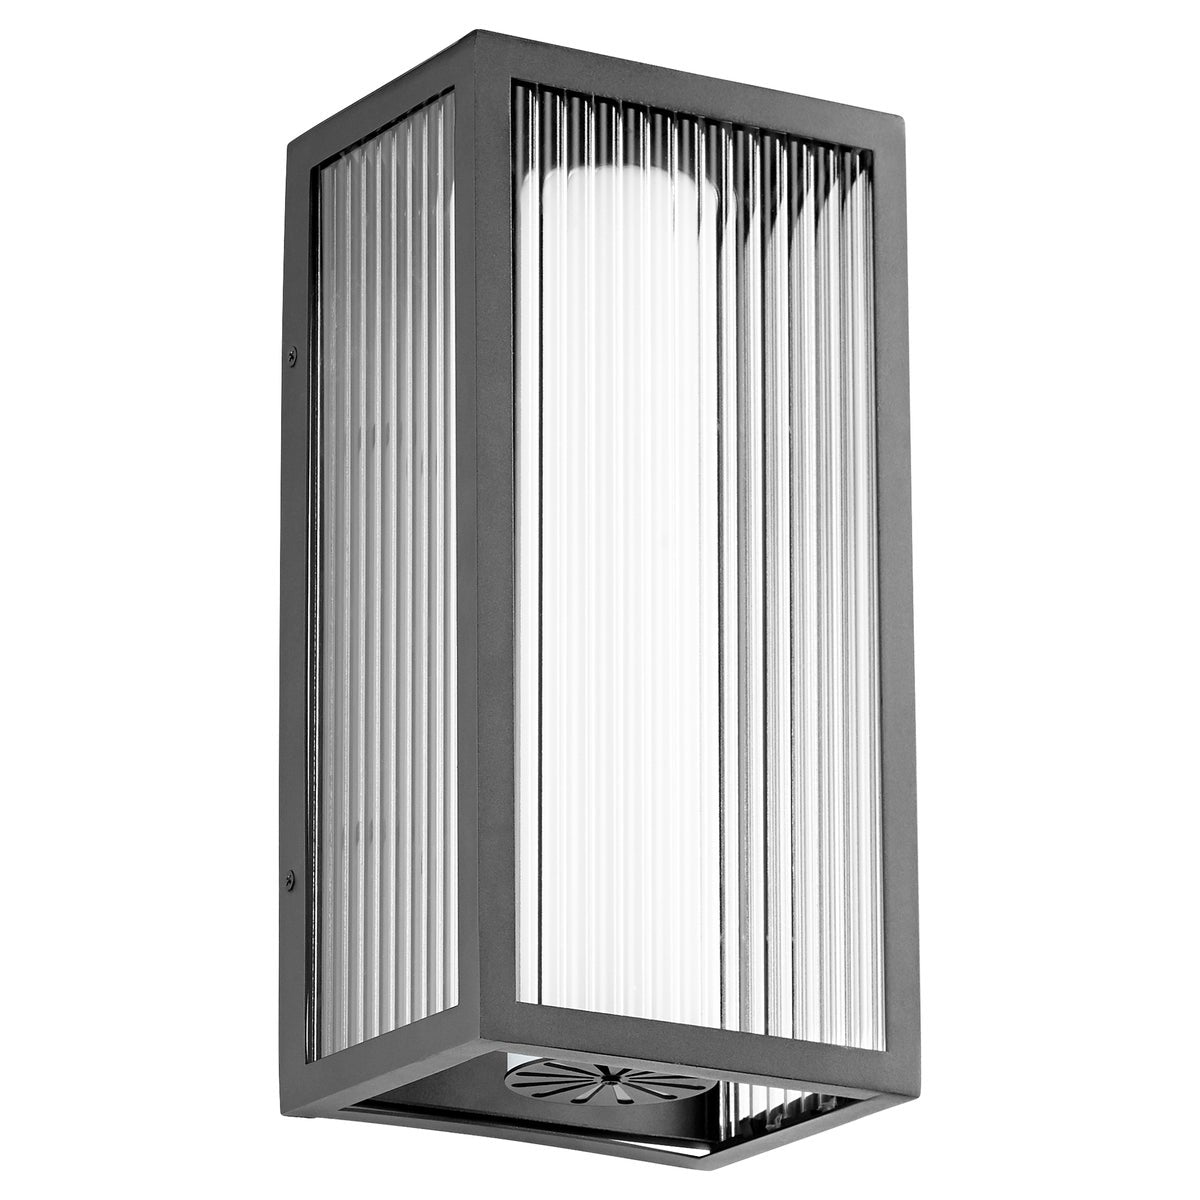 Outdoor Modern Wall Light with frosted shade housed inside clear fluted glass exterior, providing updated look and functional beauty to your outdoor ensemble. 3 efficient, dimmable LED light sources. Noir finish. 7.25"W x 14.75"H x 5.75"E. UL Listed, Wet Location. 2-year warranty.